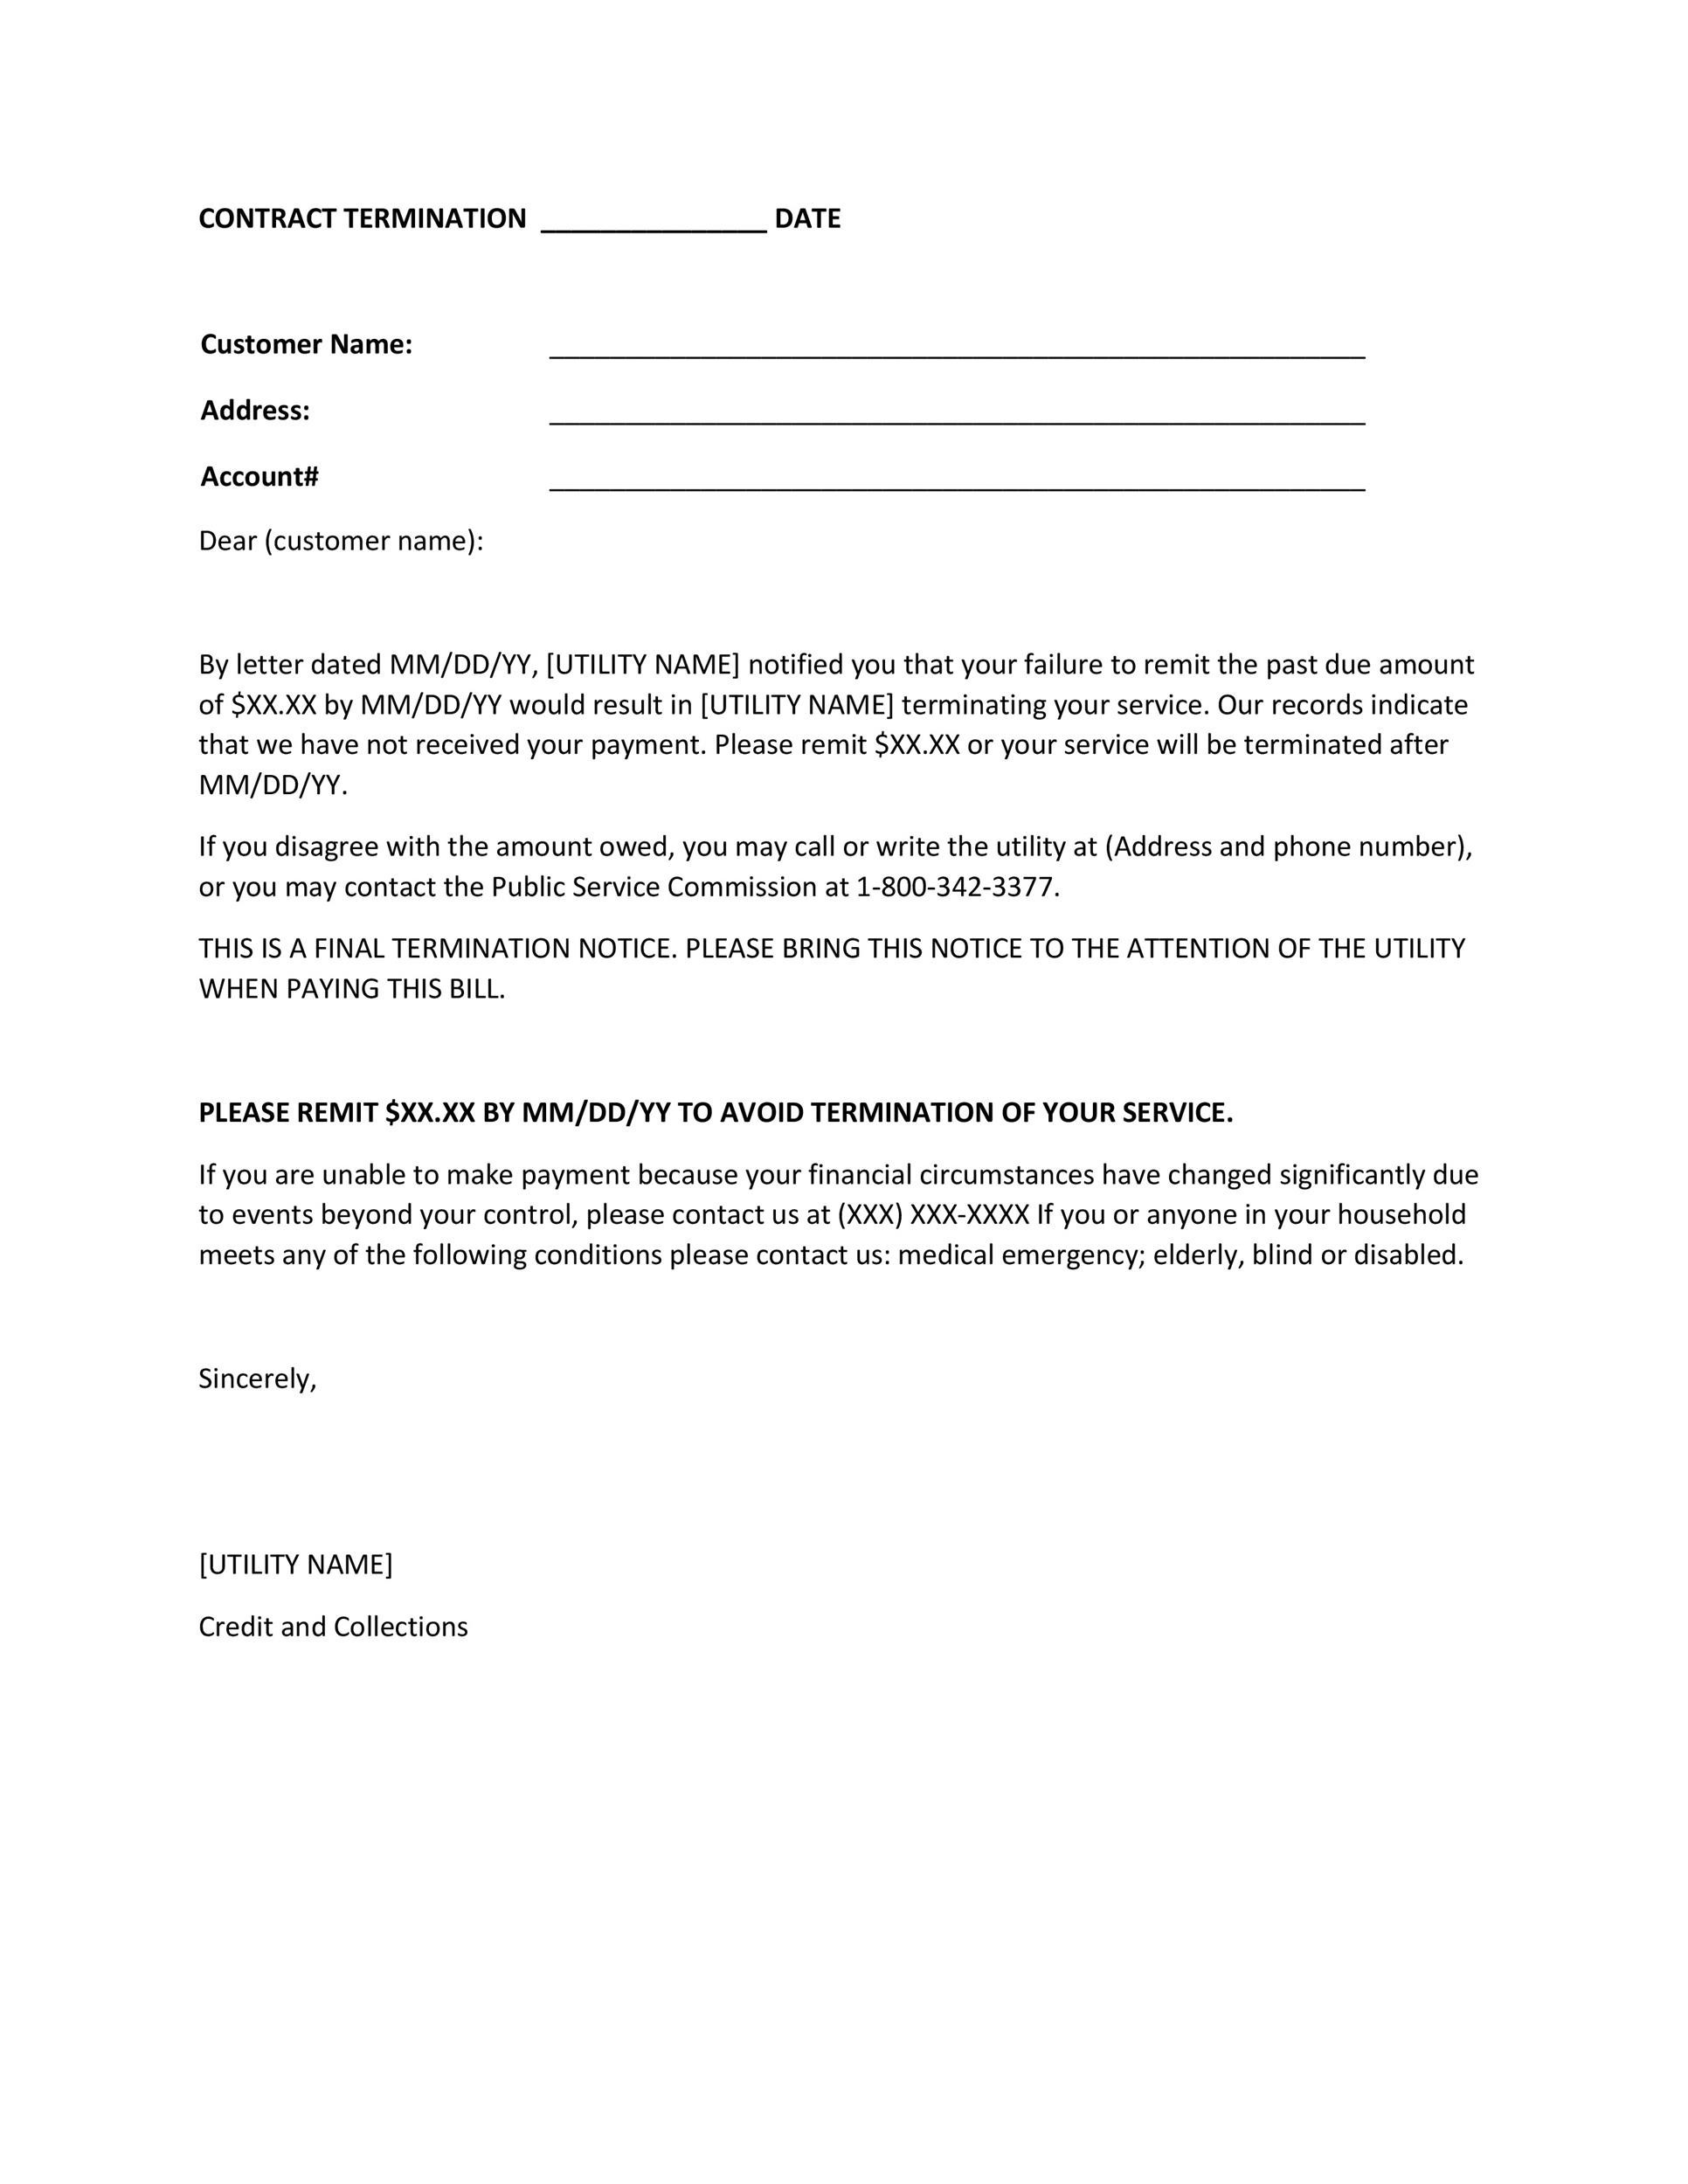 Sample Letter Of Termination Of Service Agreement from templatelab.com